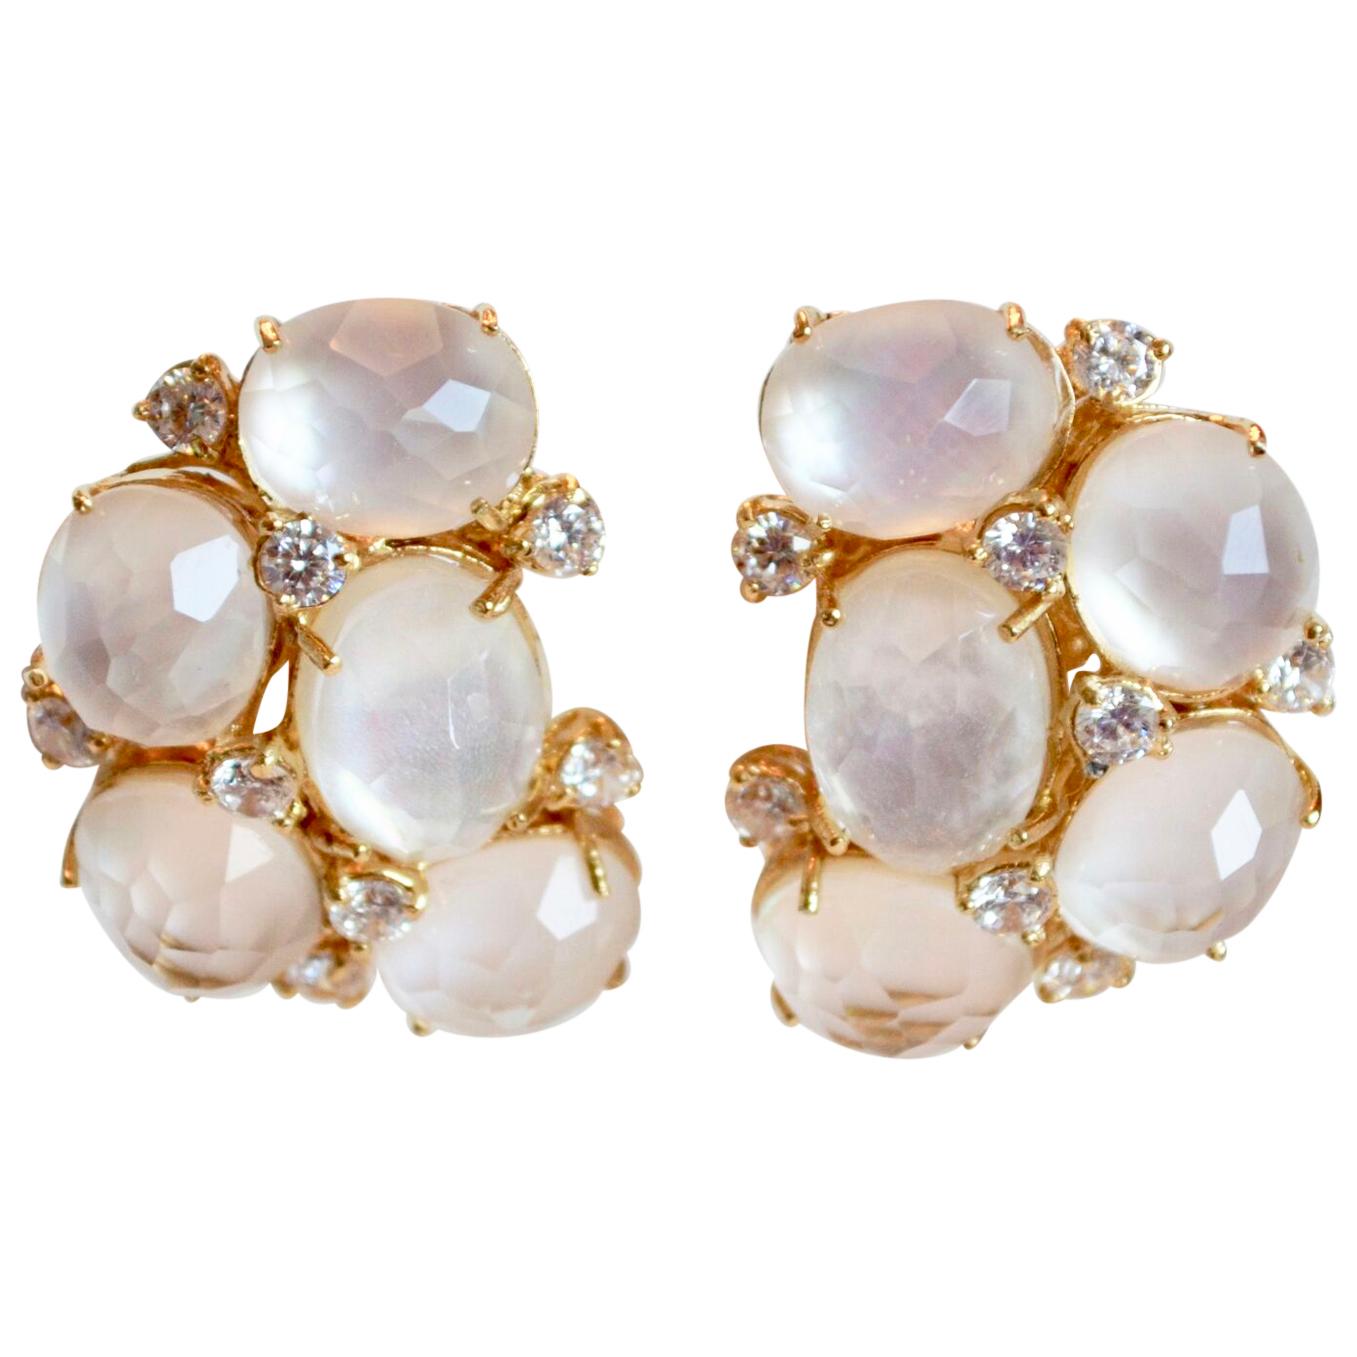 J. Kasi Cluster White Quartz and Mother of Pearl Clip Earrings